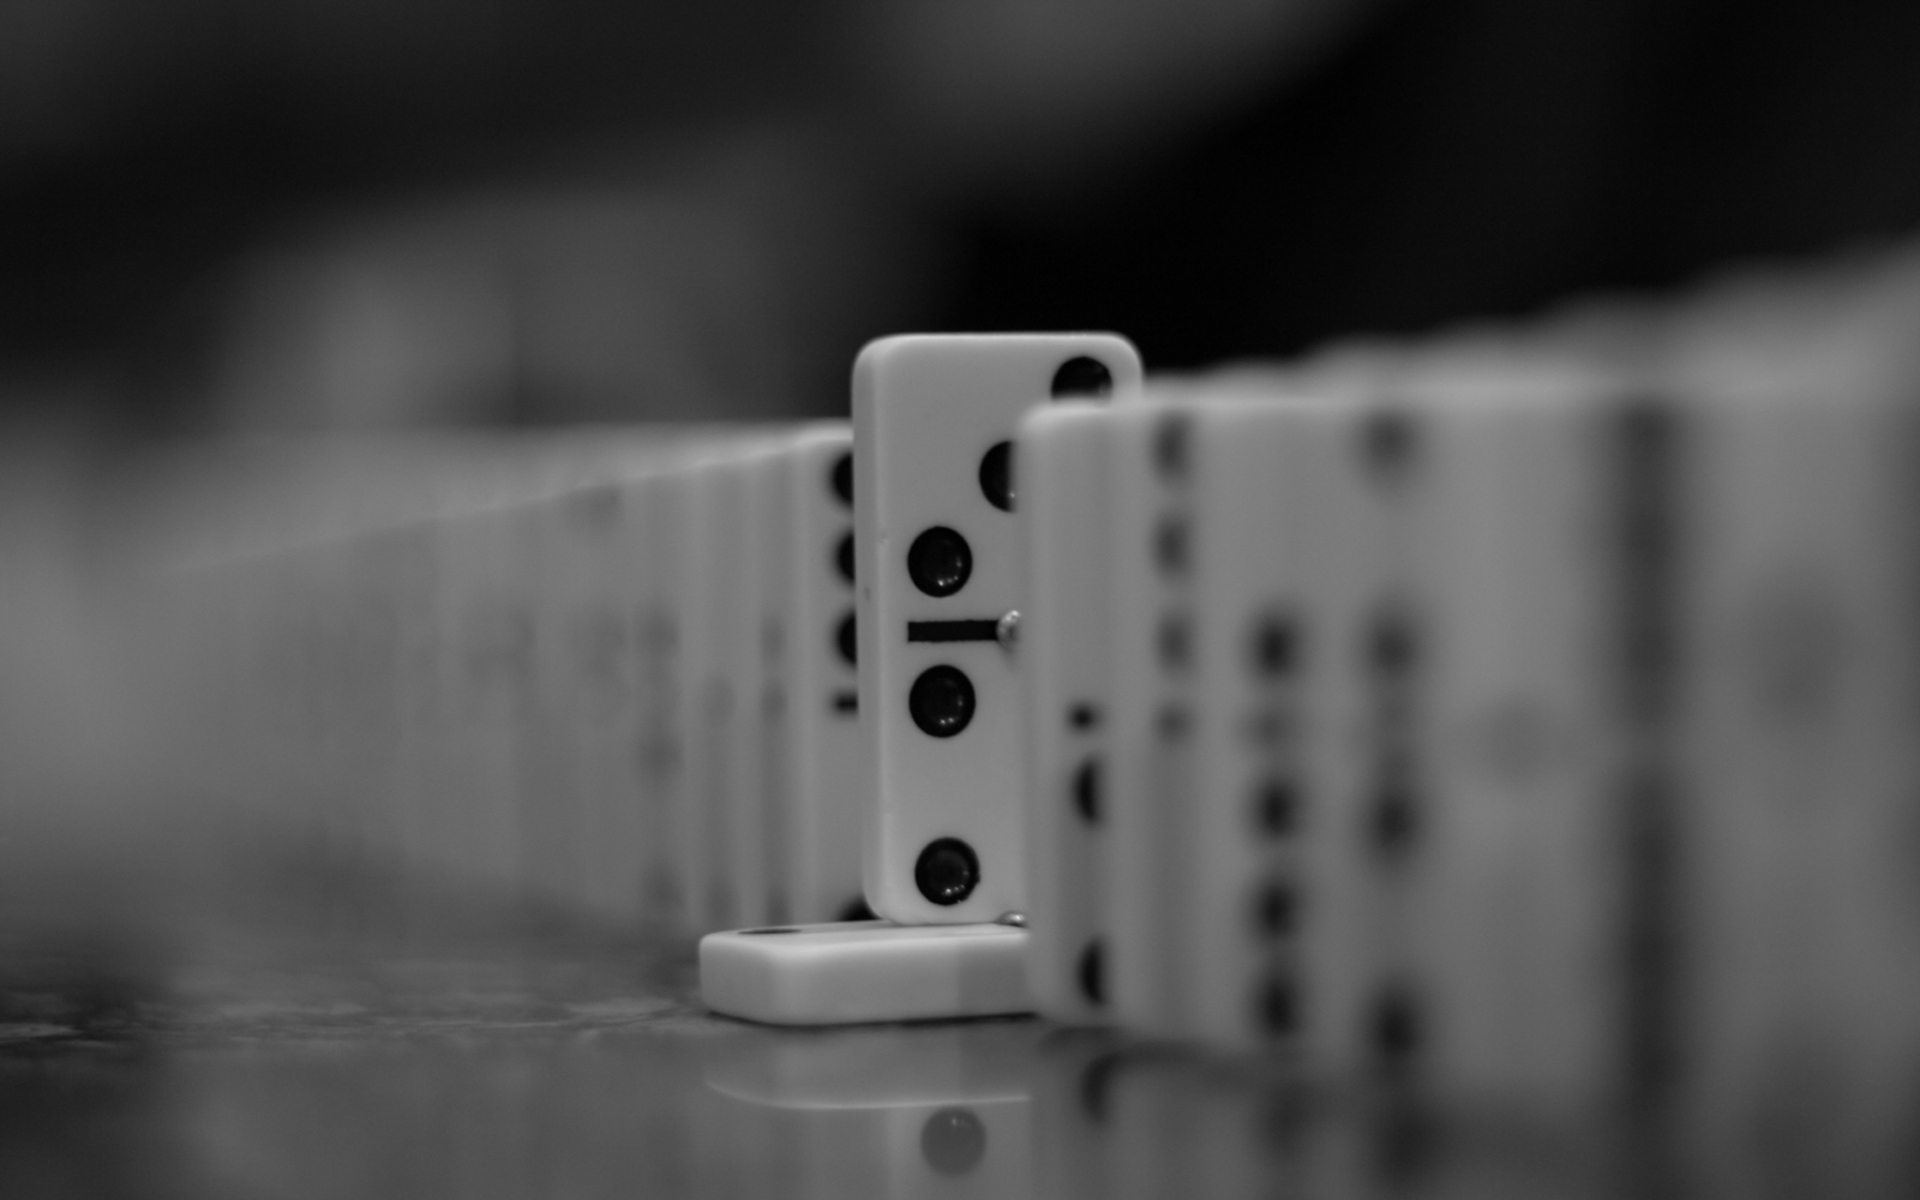 Man Made Dominos HD Wallpaper | Background Image